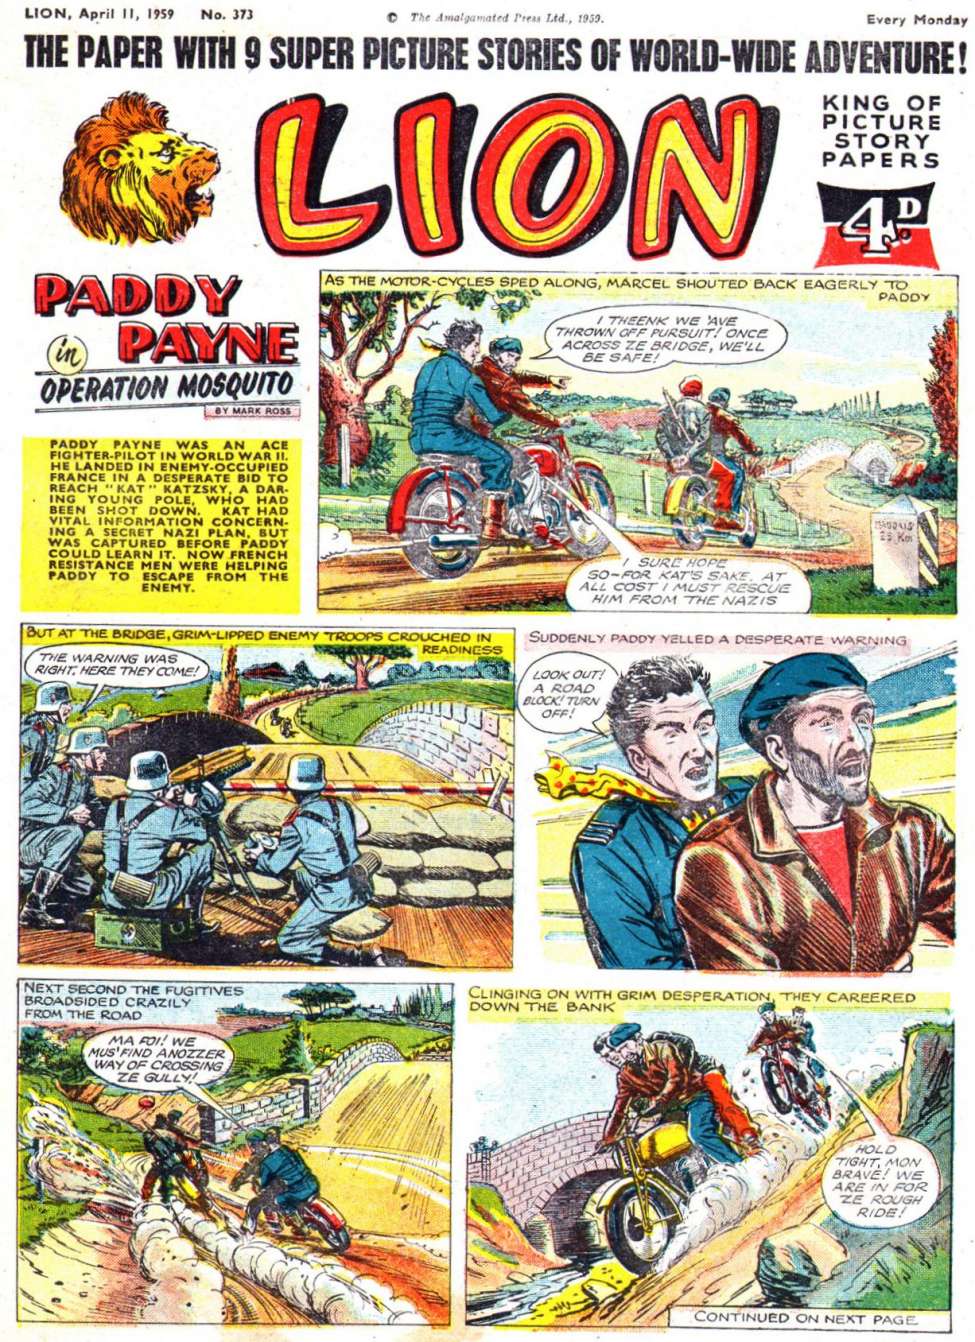 Book Cover For Lion 373